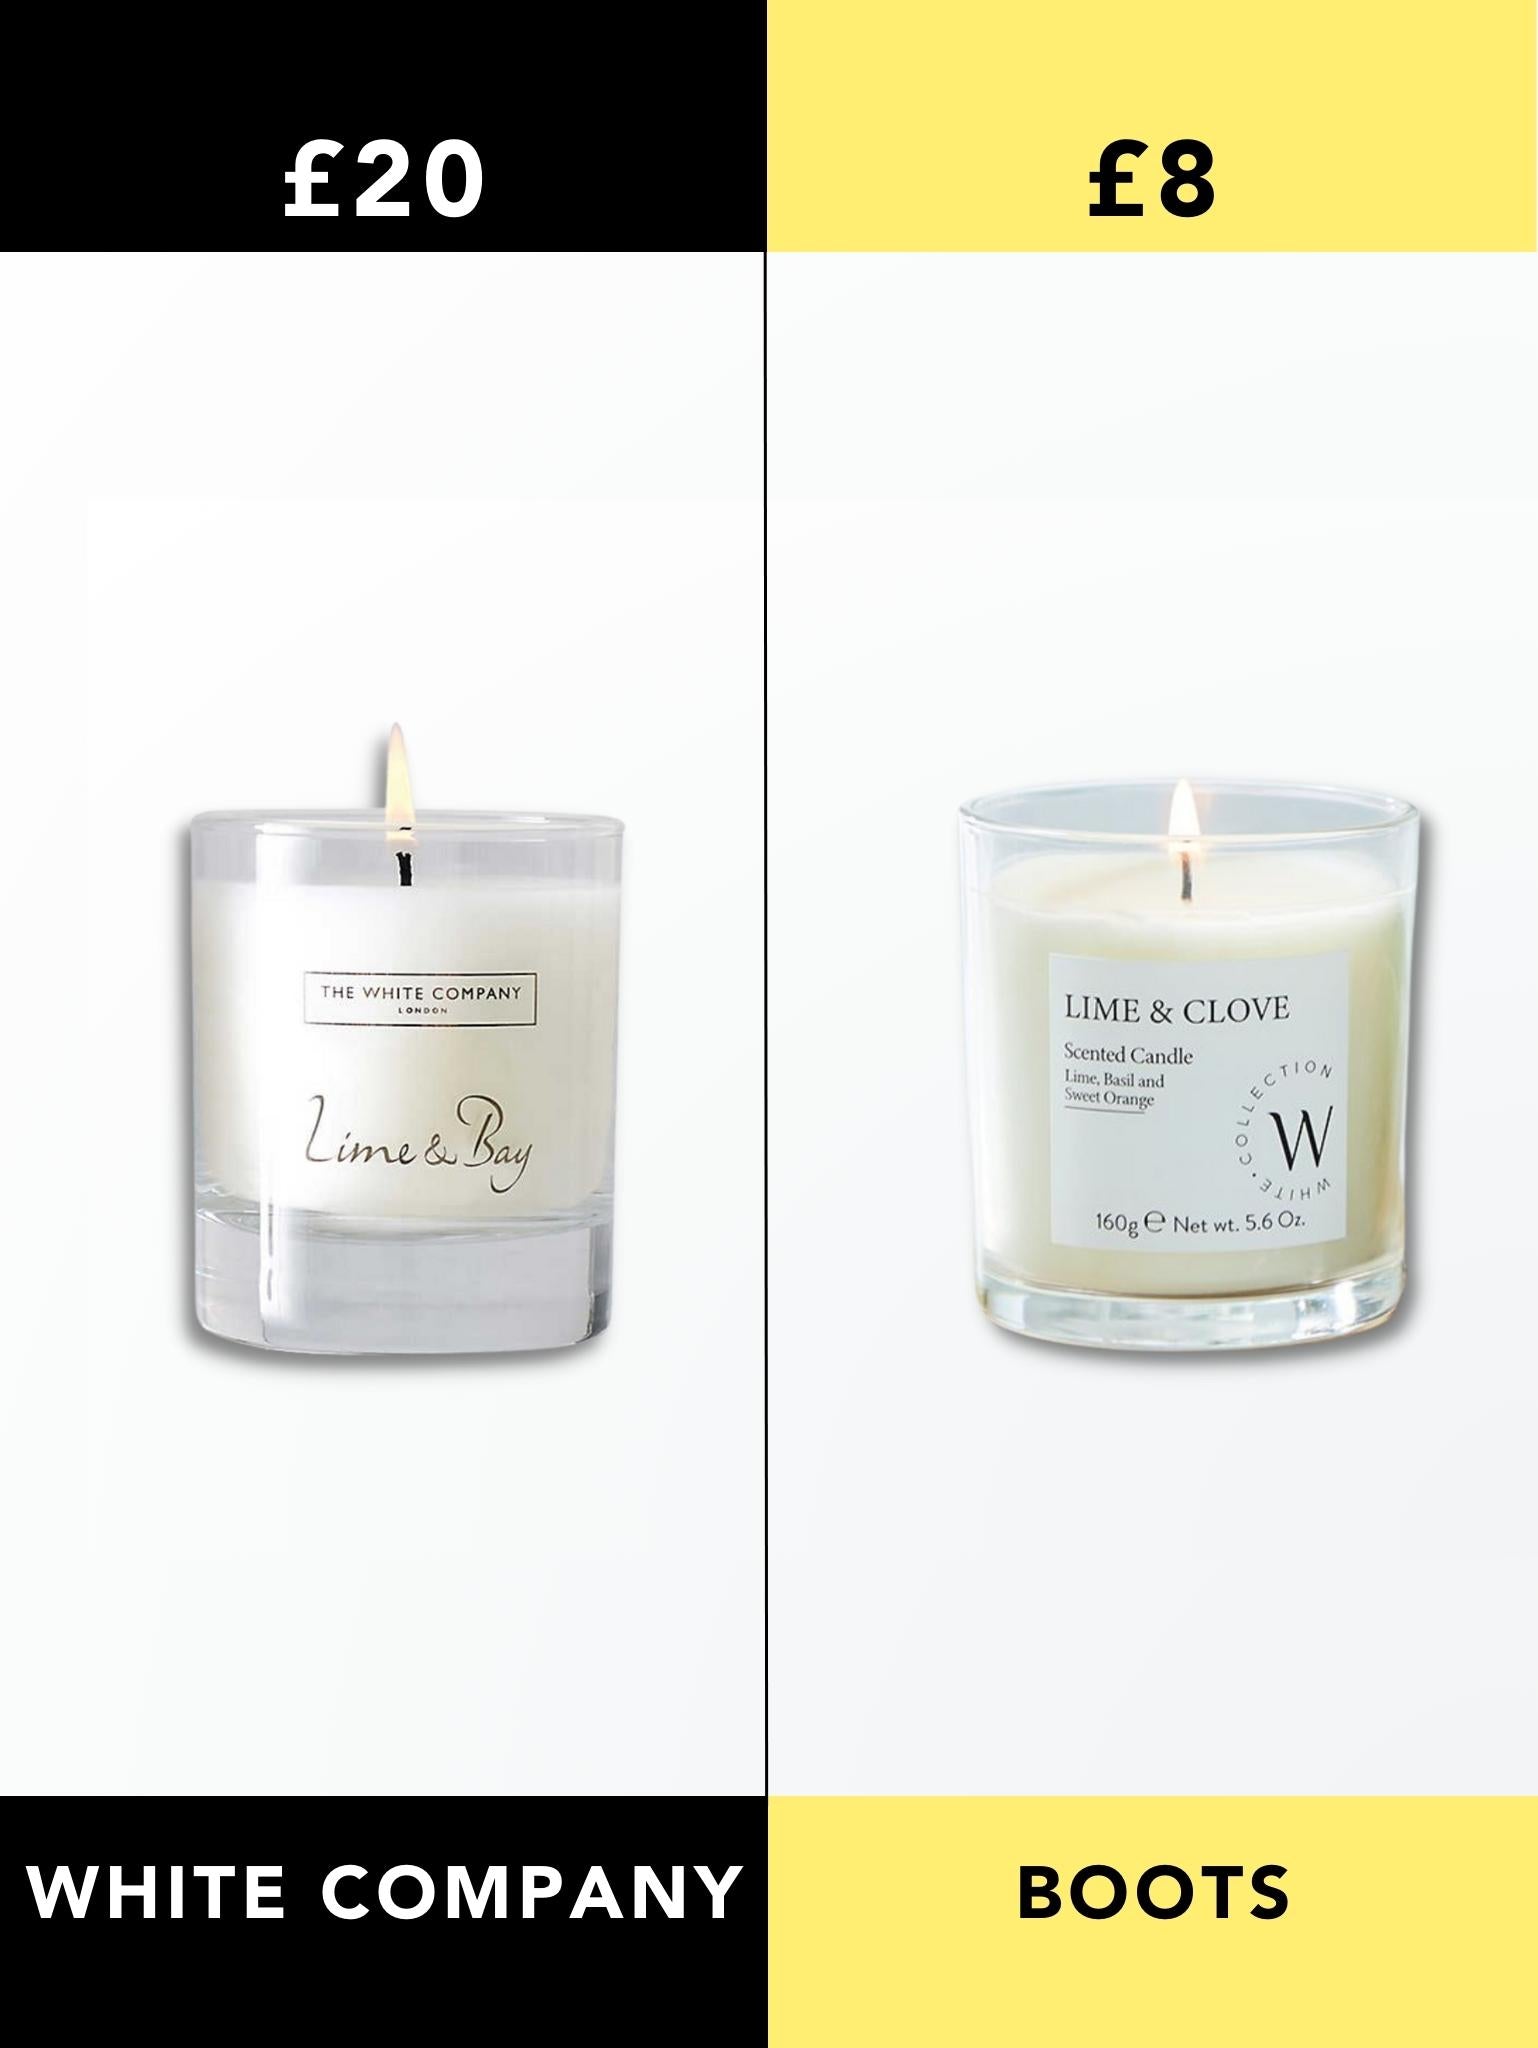 White Company Lime & Bay Candle vs Boots Candle